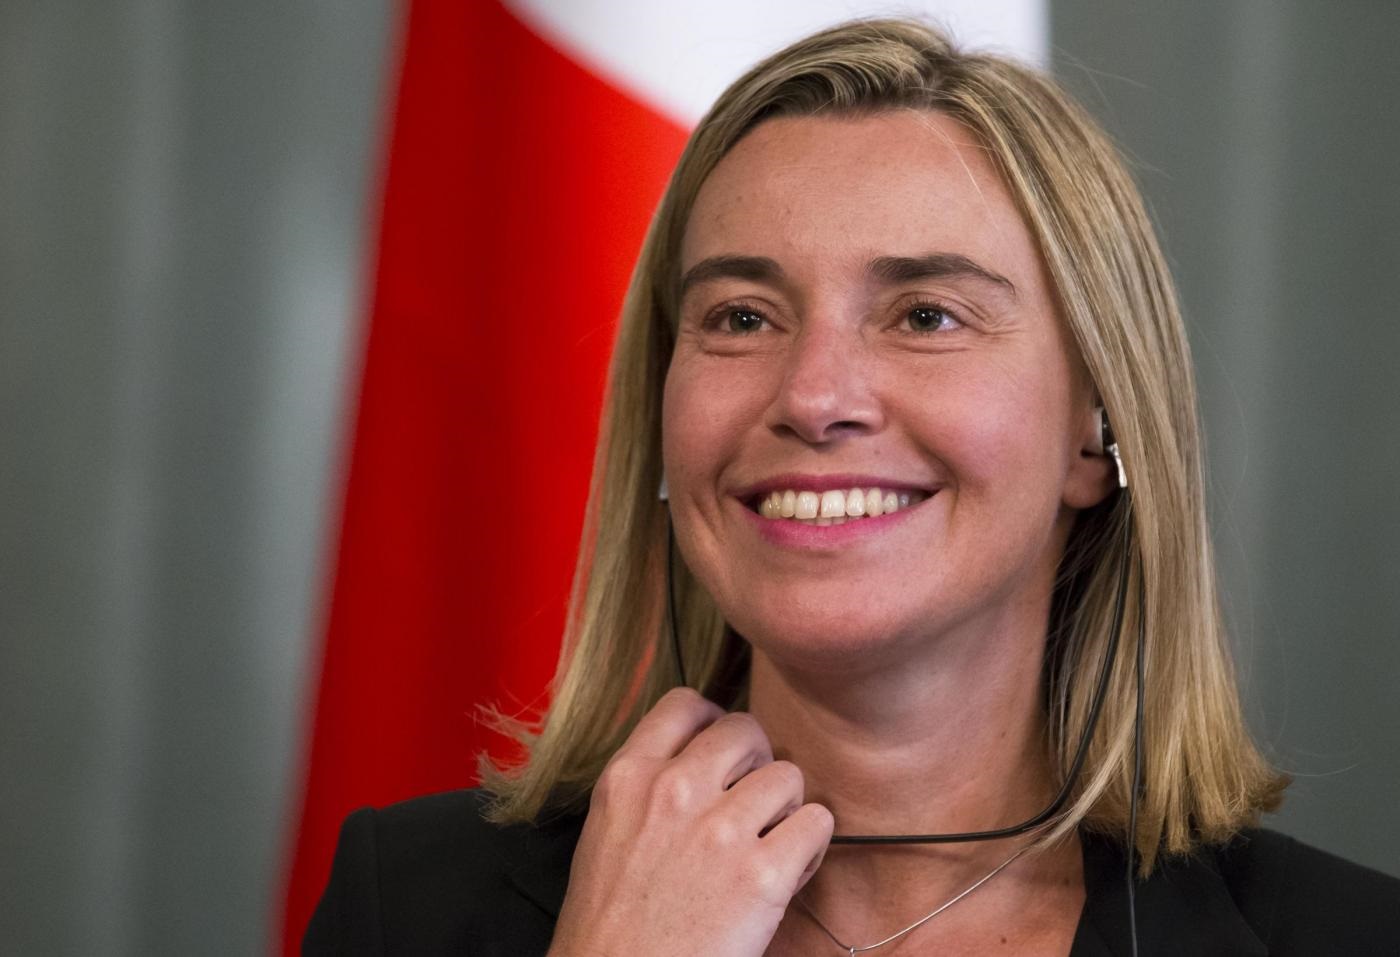 EU foreign policy chief reaffirms EU commitment to full implementation of nuclear deal